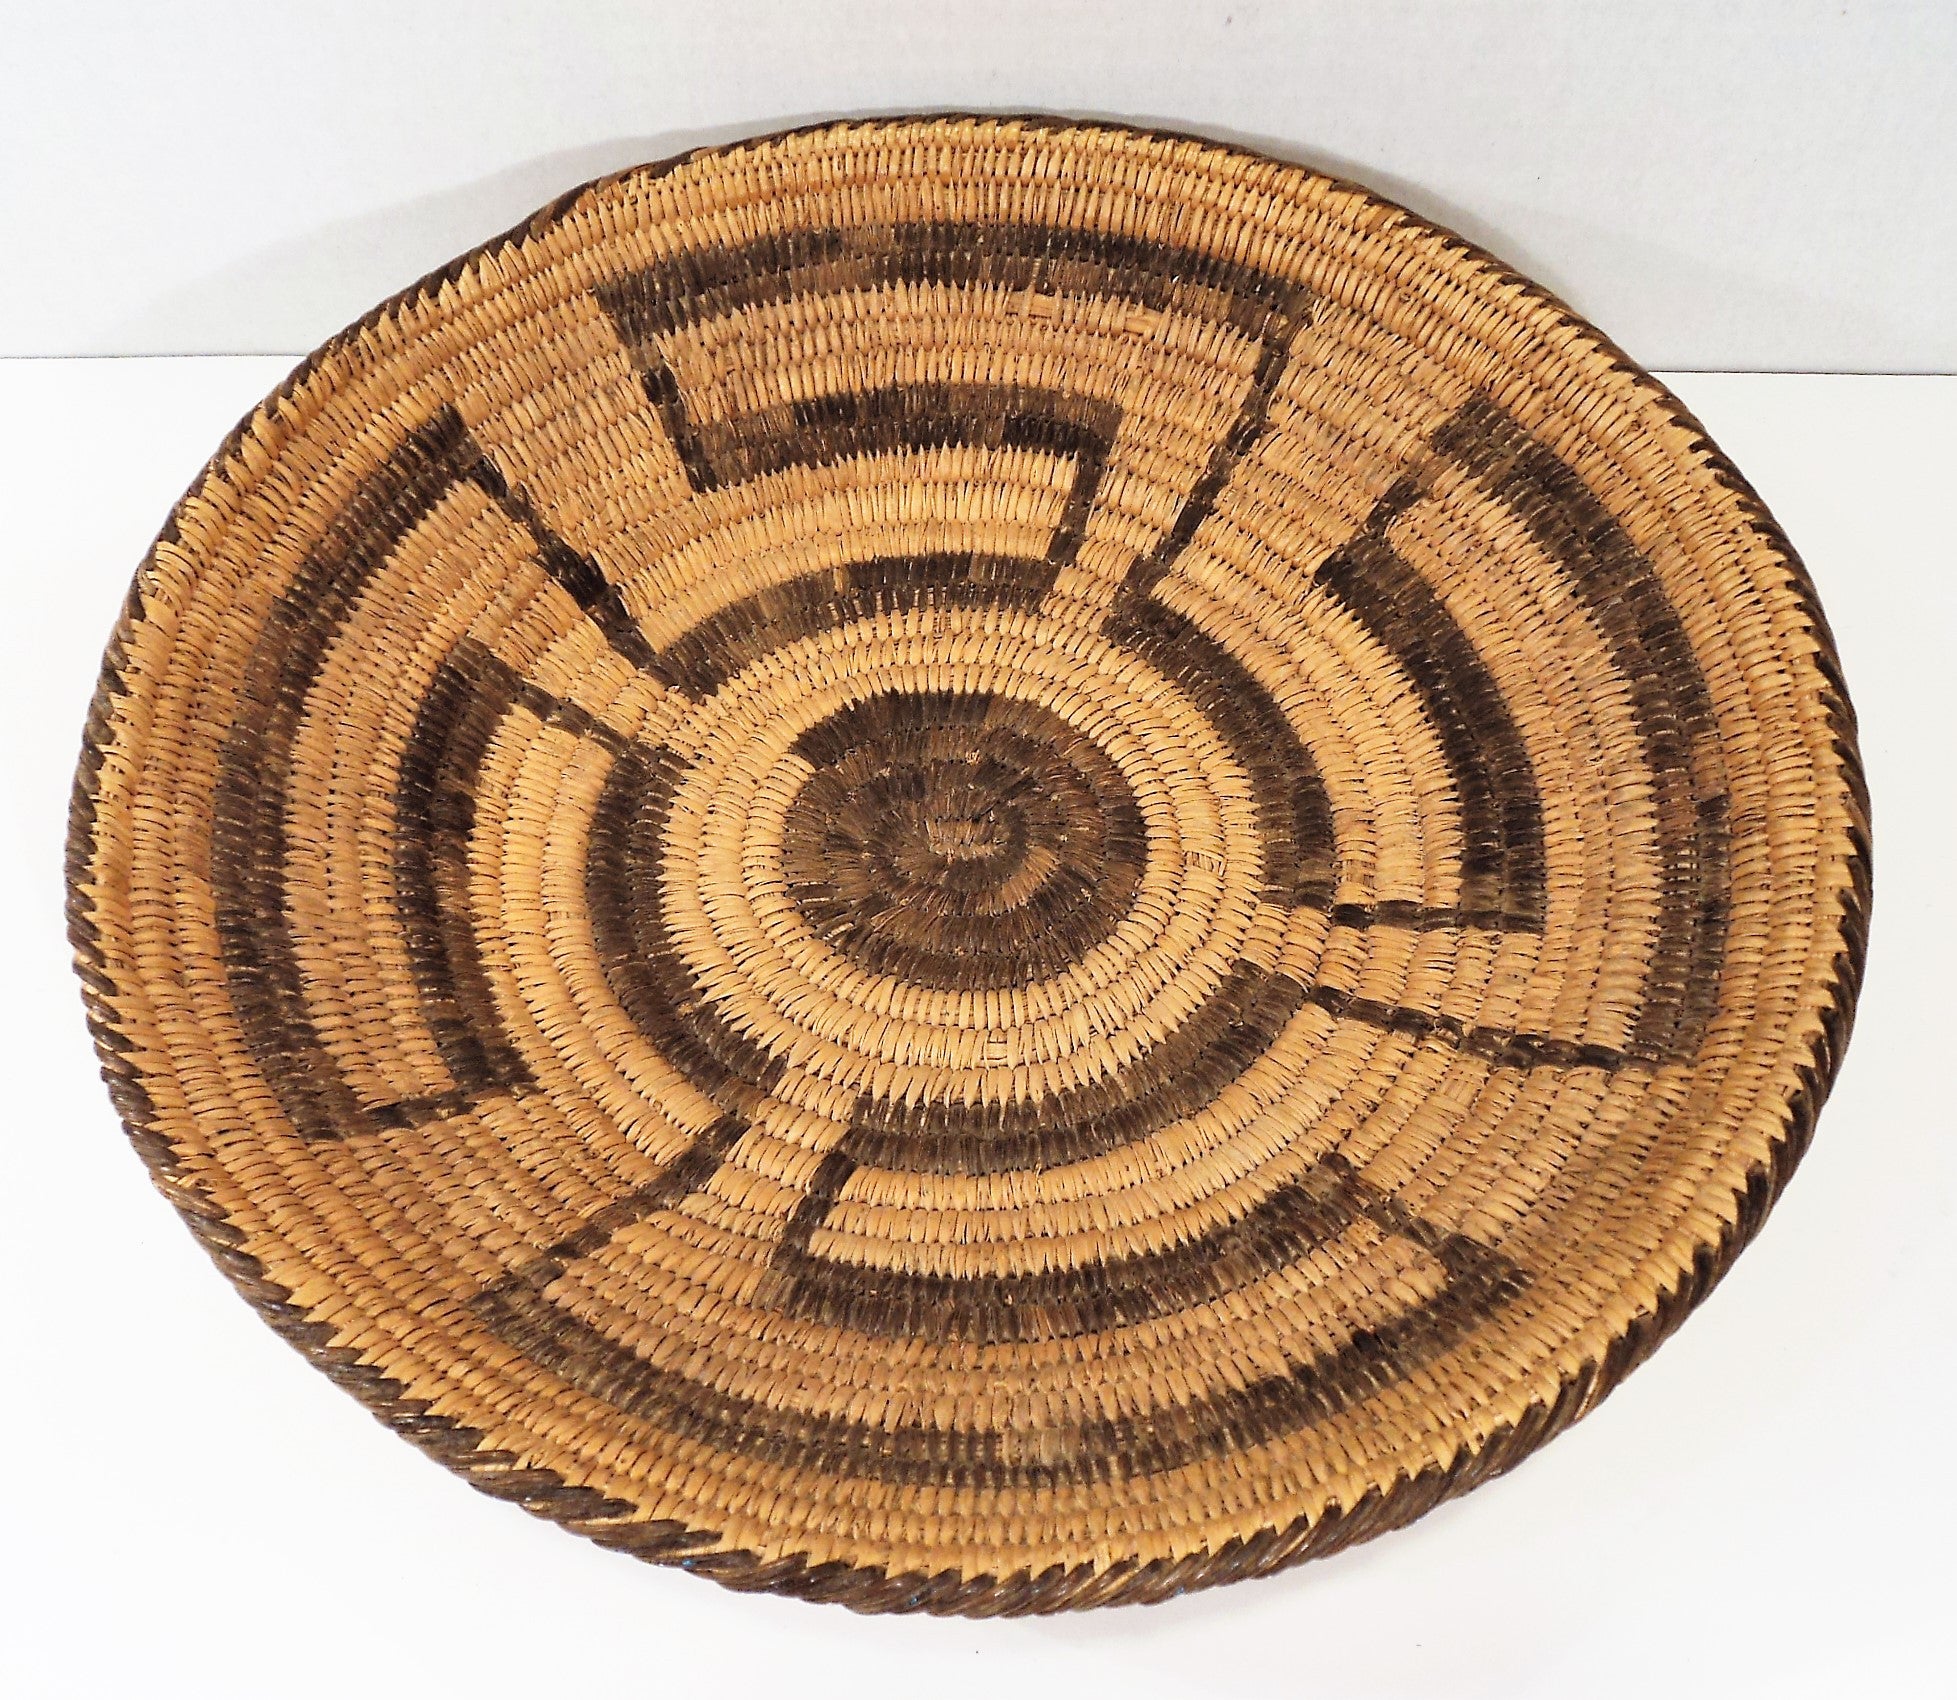 Pima Tray Basket with Four Winds Pattern 1915-1920